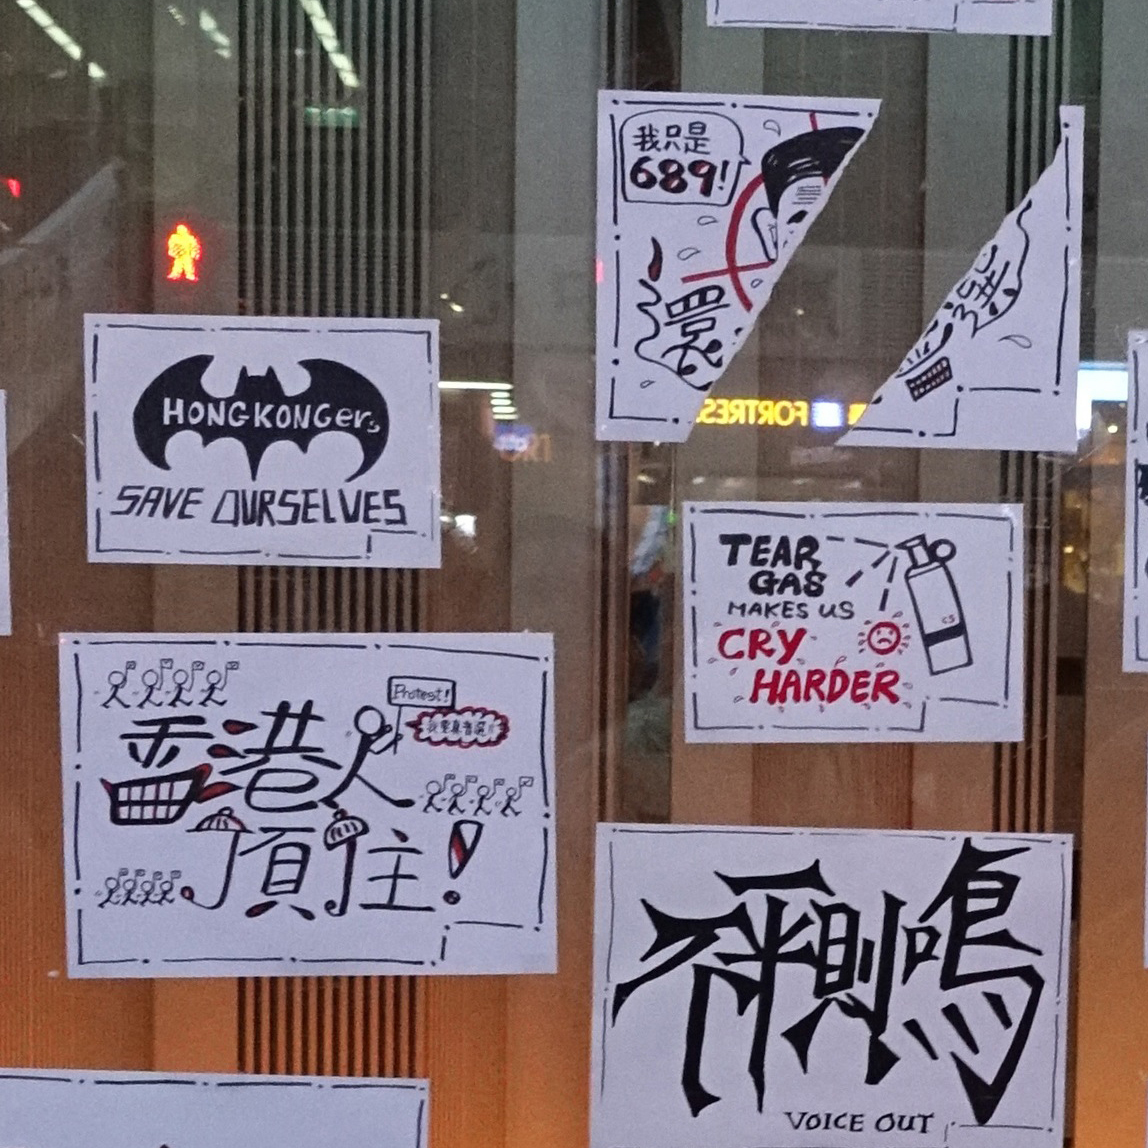 Protest posters that say 'Tear gas makes us cry harder'